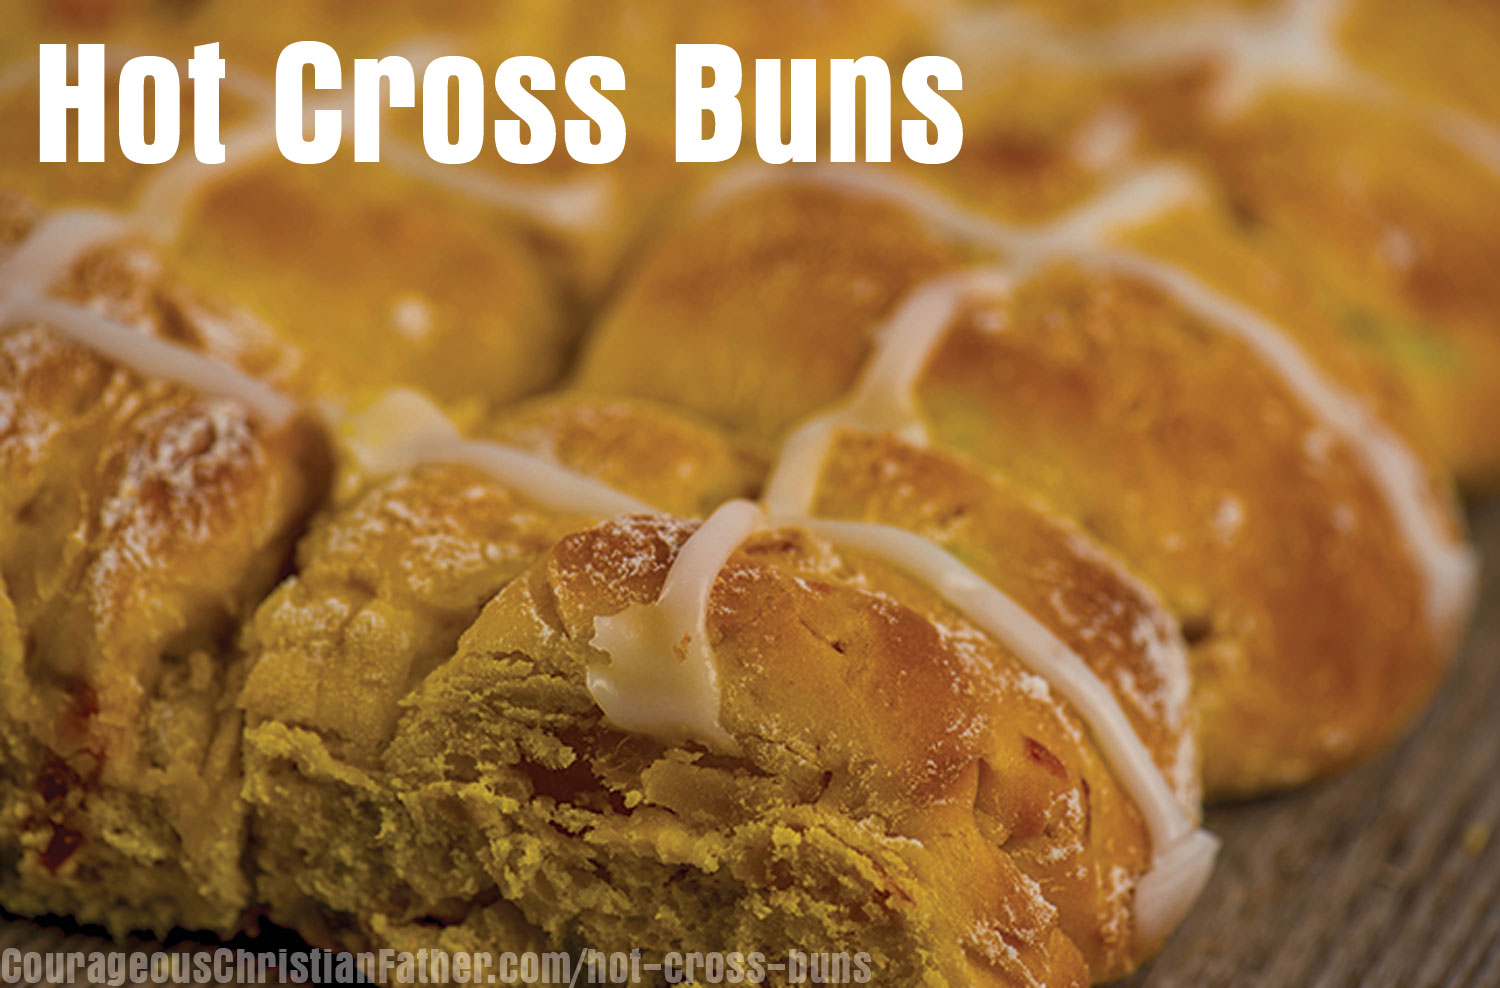 Enjoy hot cross buns this Easter - A number of foods are enjoyed during Easter celebrations, from hard-boiled eggs to ham to roasted lamb. Sweets such as candies and chocolates also take center stage on Easter Sunday. In addition to these traditional favorites, hot cross buns have become must-haves for many Easter celebrants. #HotCrossBuns